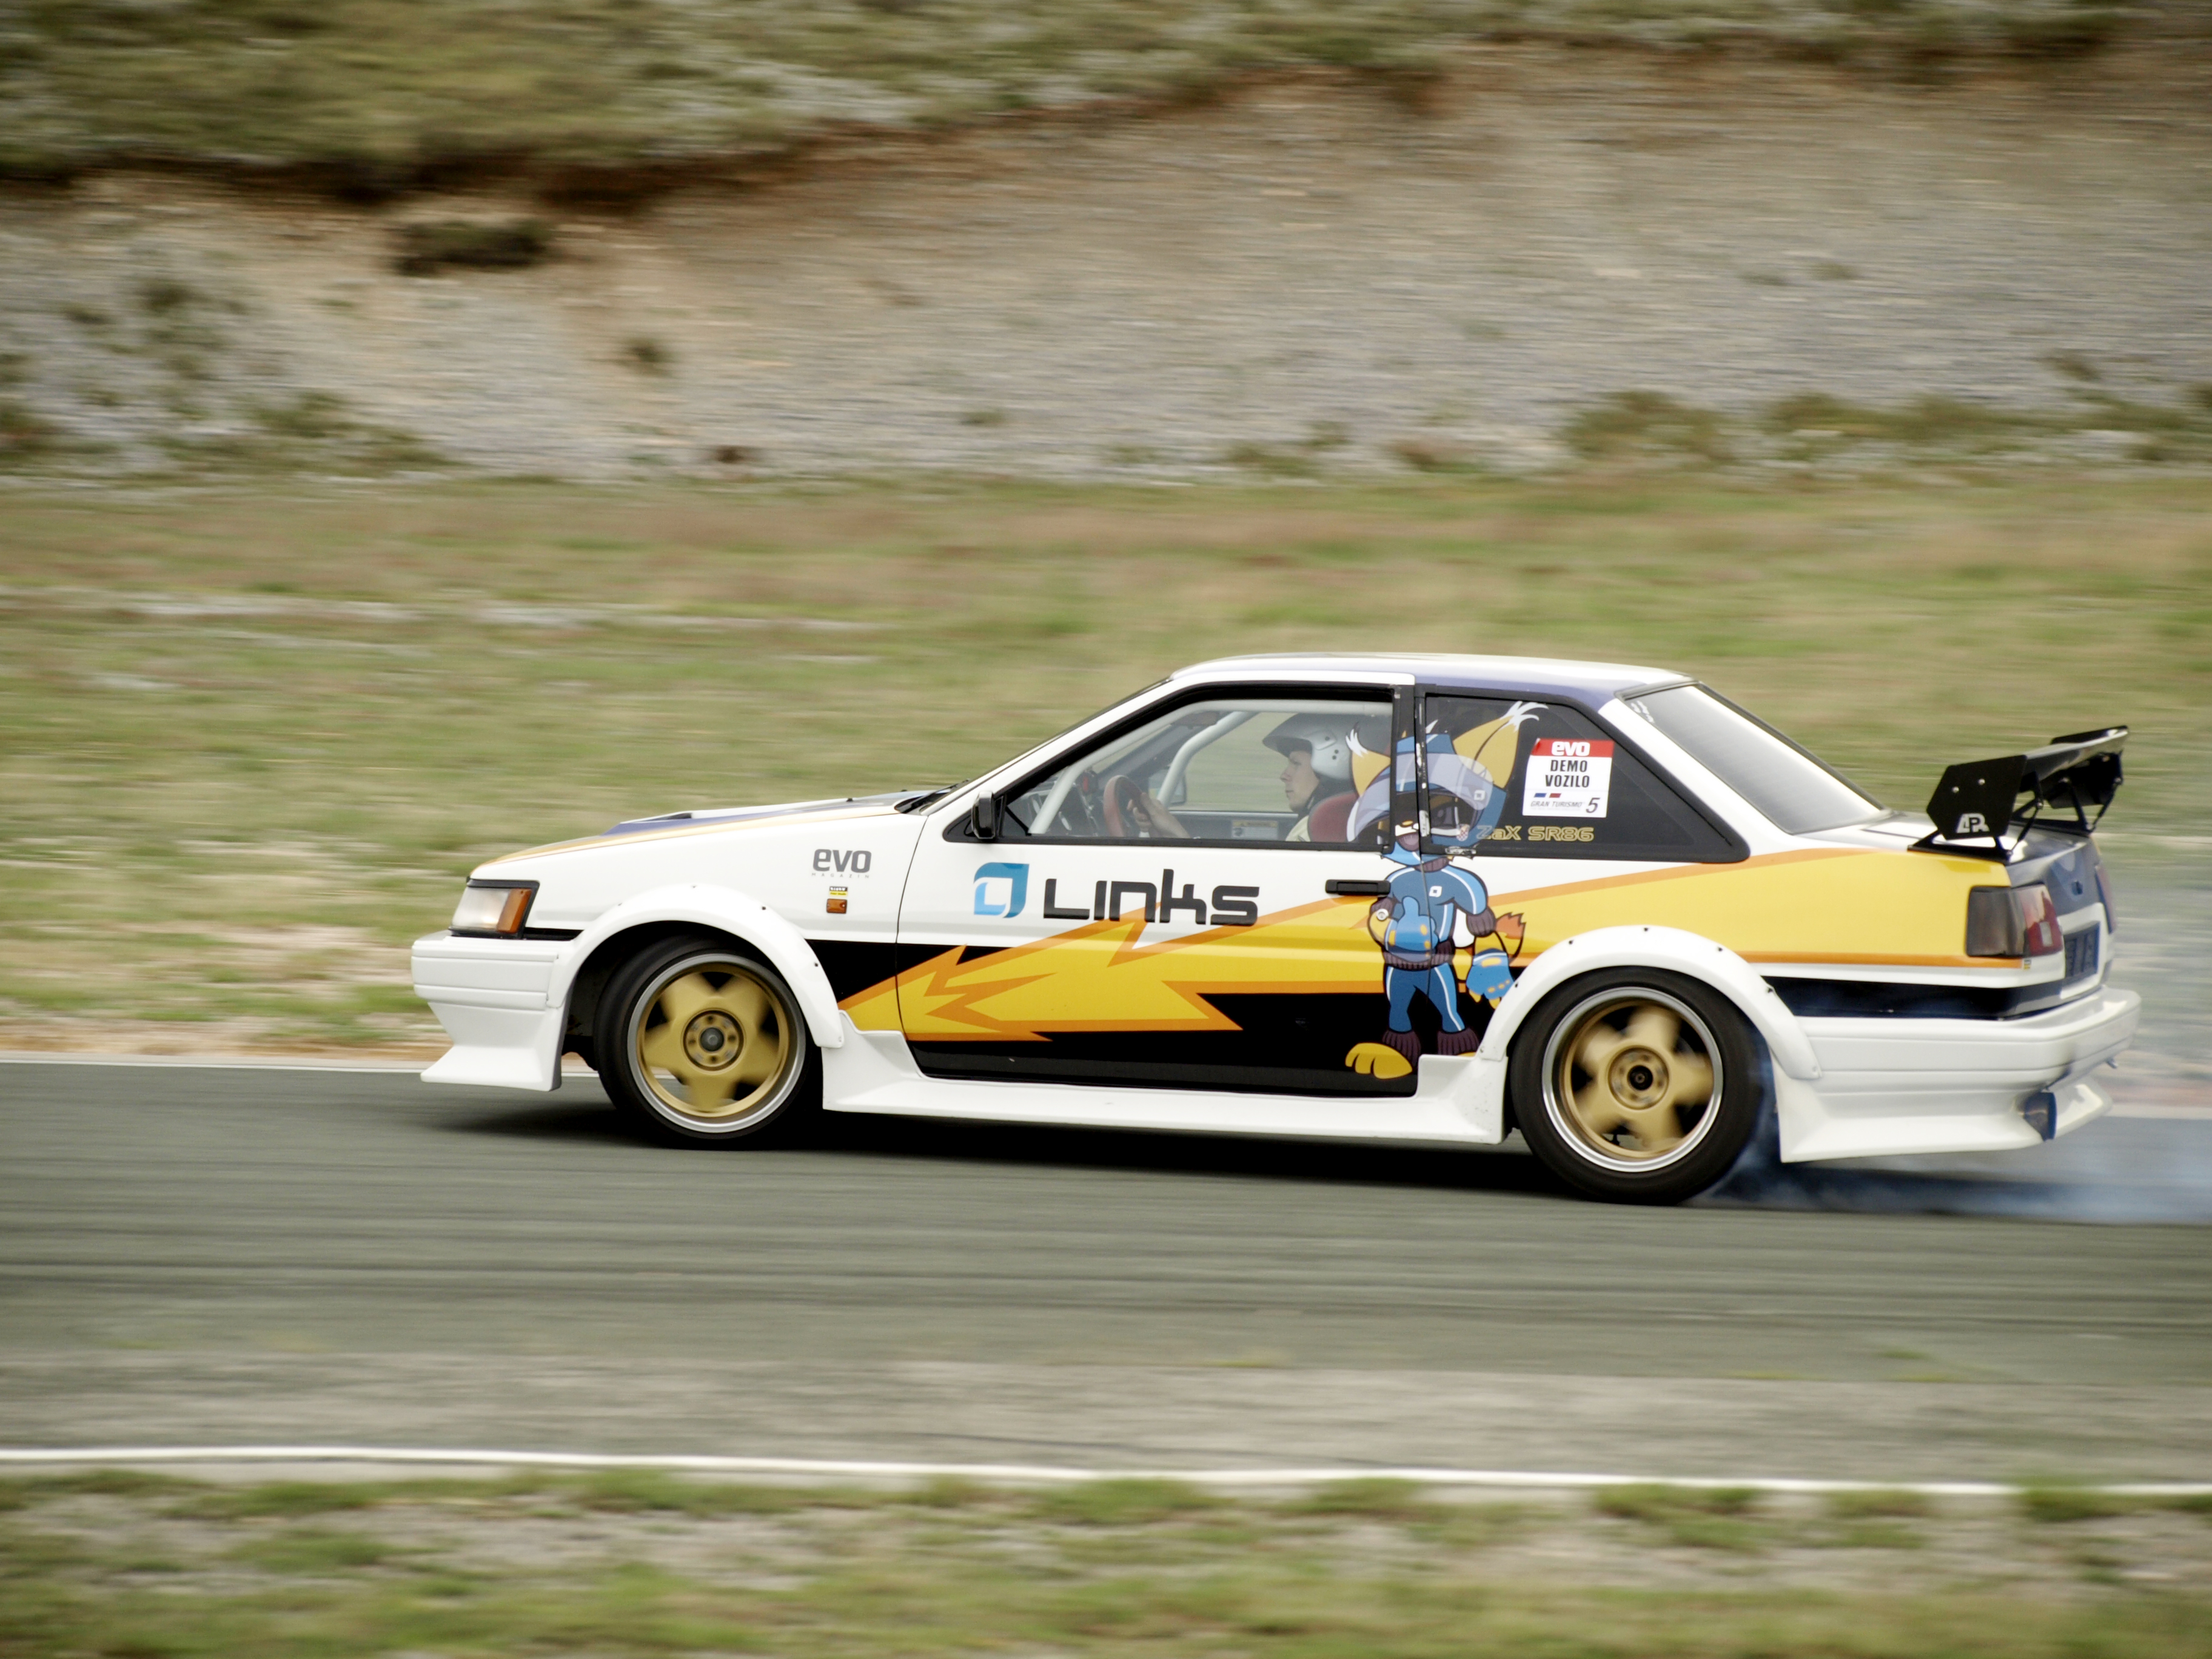 [Image: AEU86 AE86 - Levin Coupe from Croatia - ...6 with IRS]